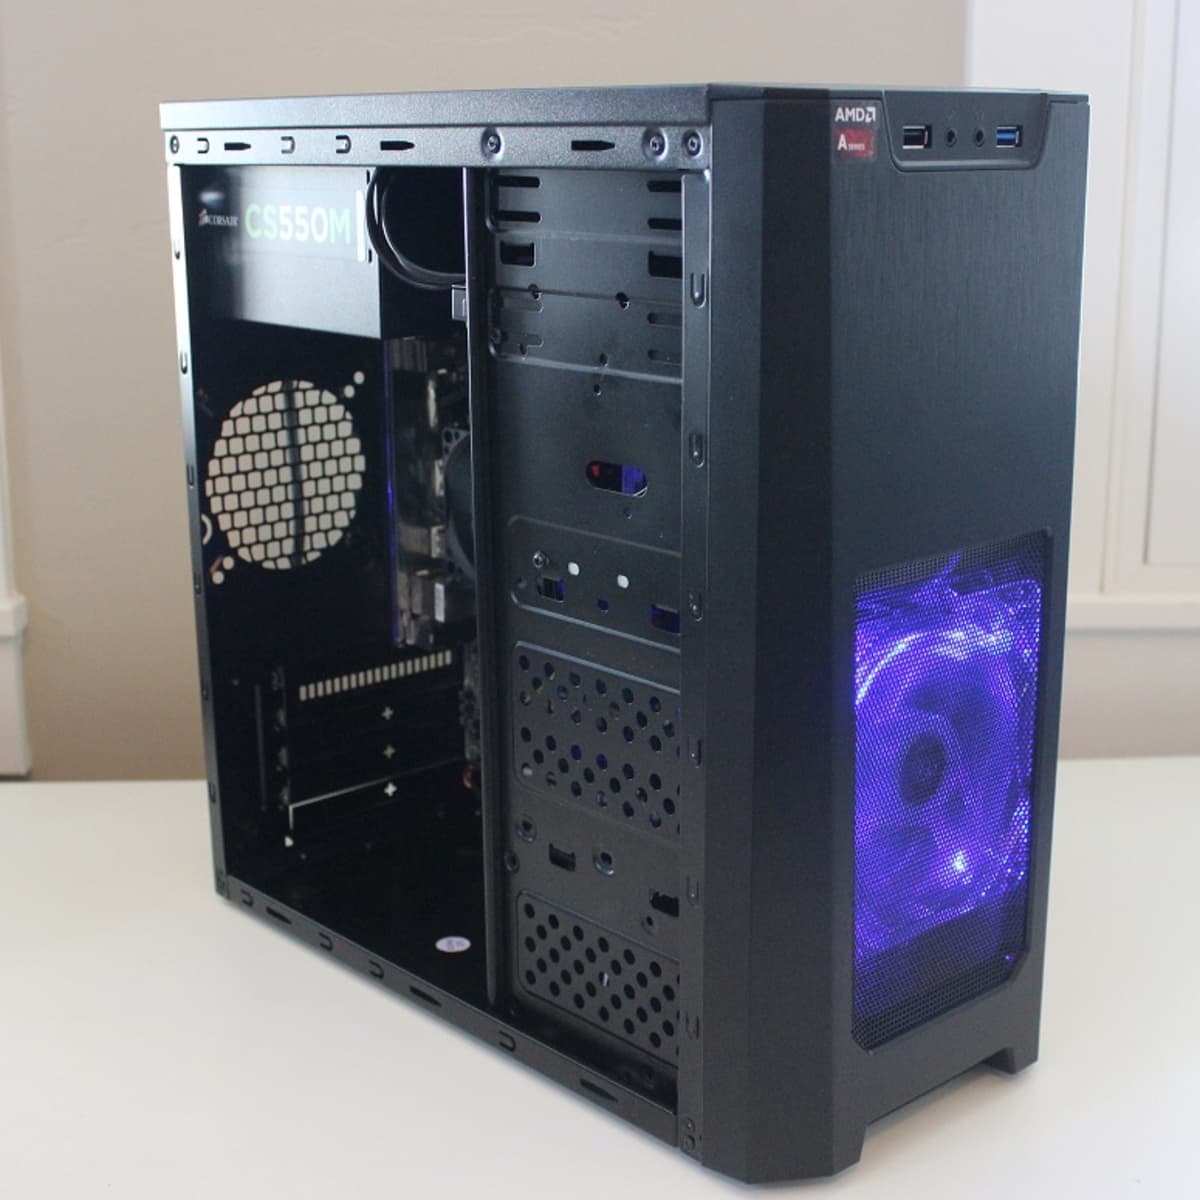 Best Budget $150 To $200 Gaming Pc Build - Turbofuture